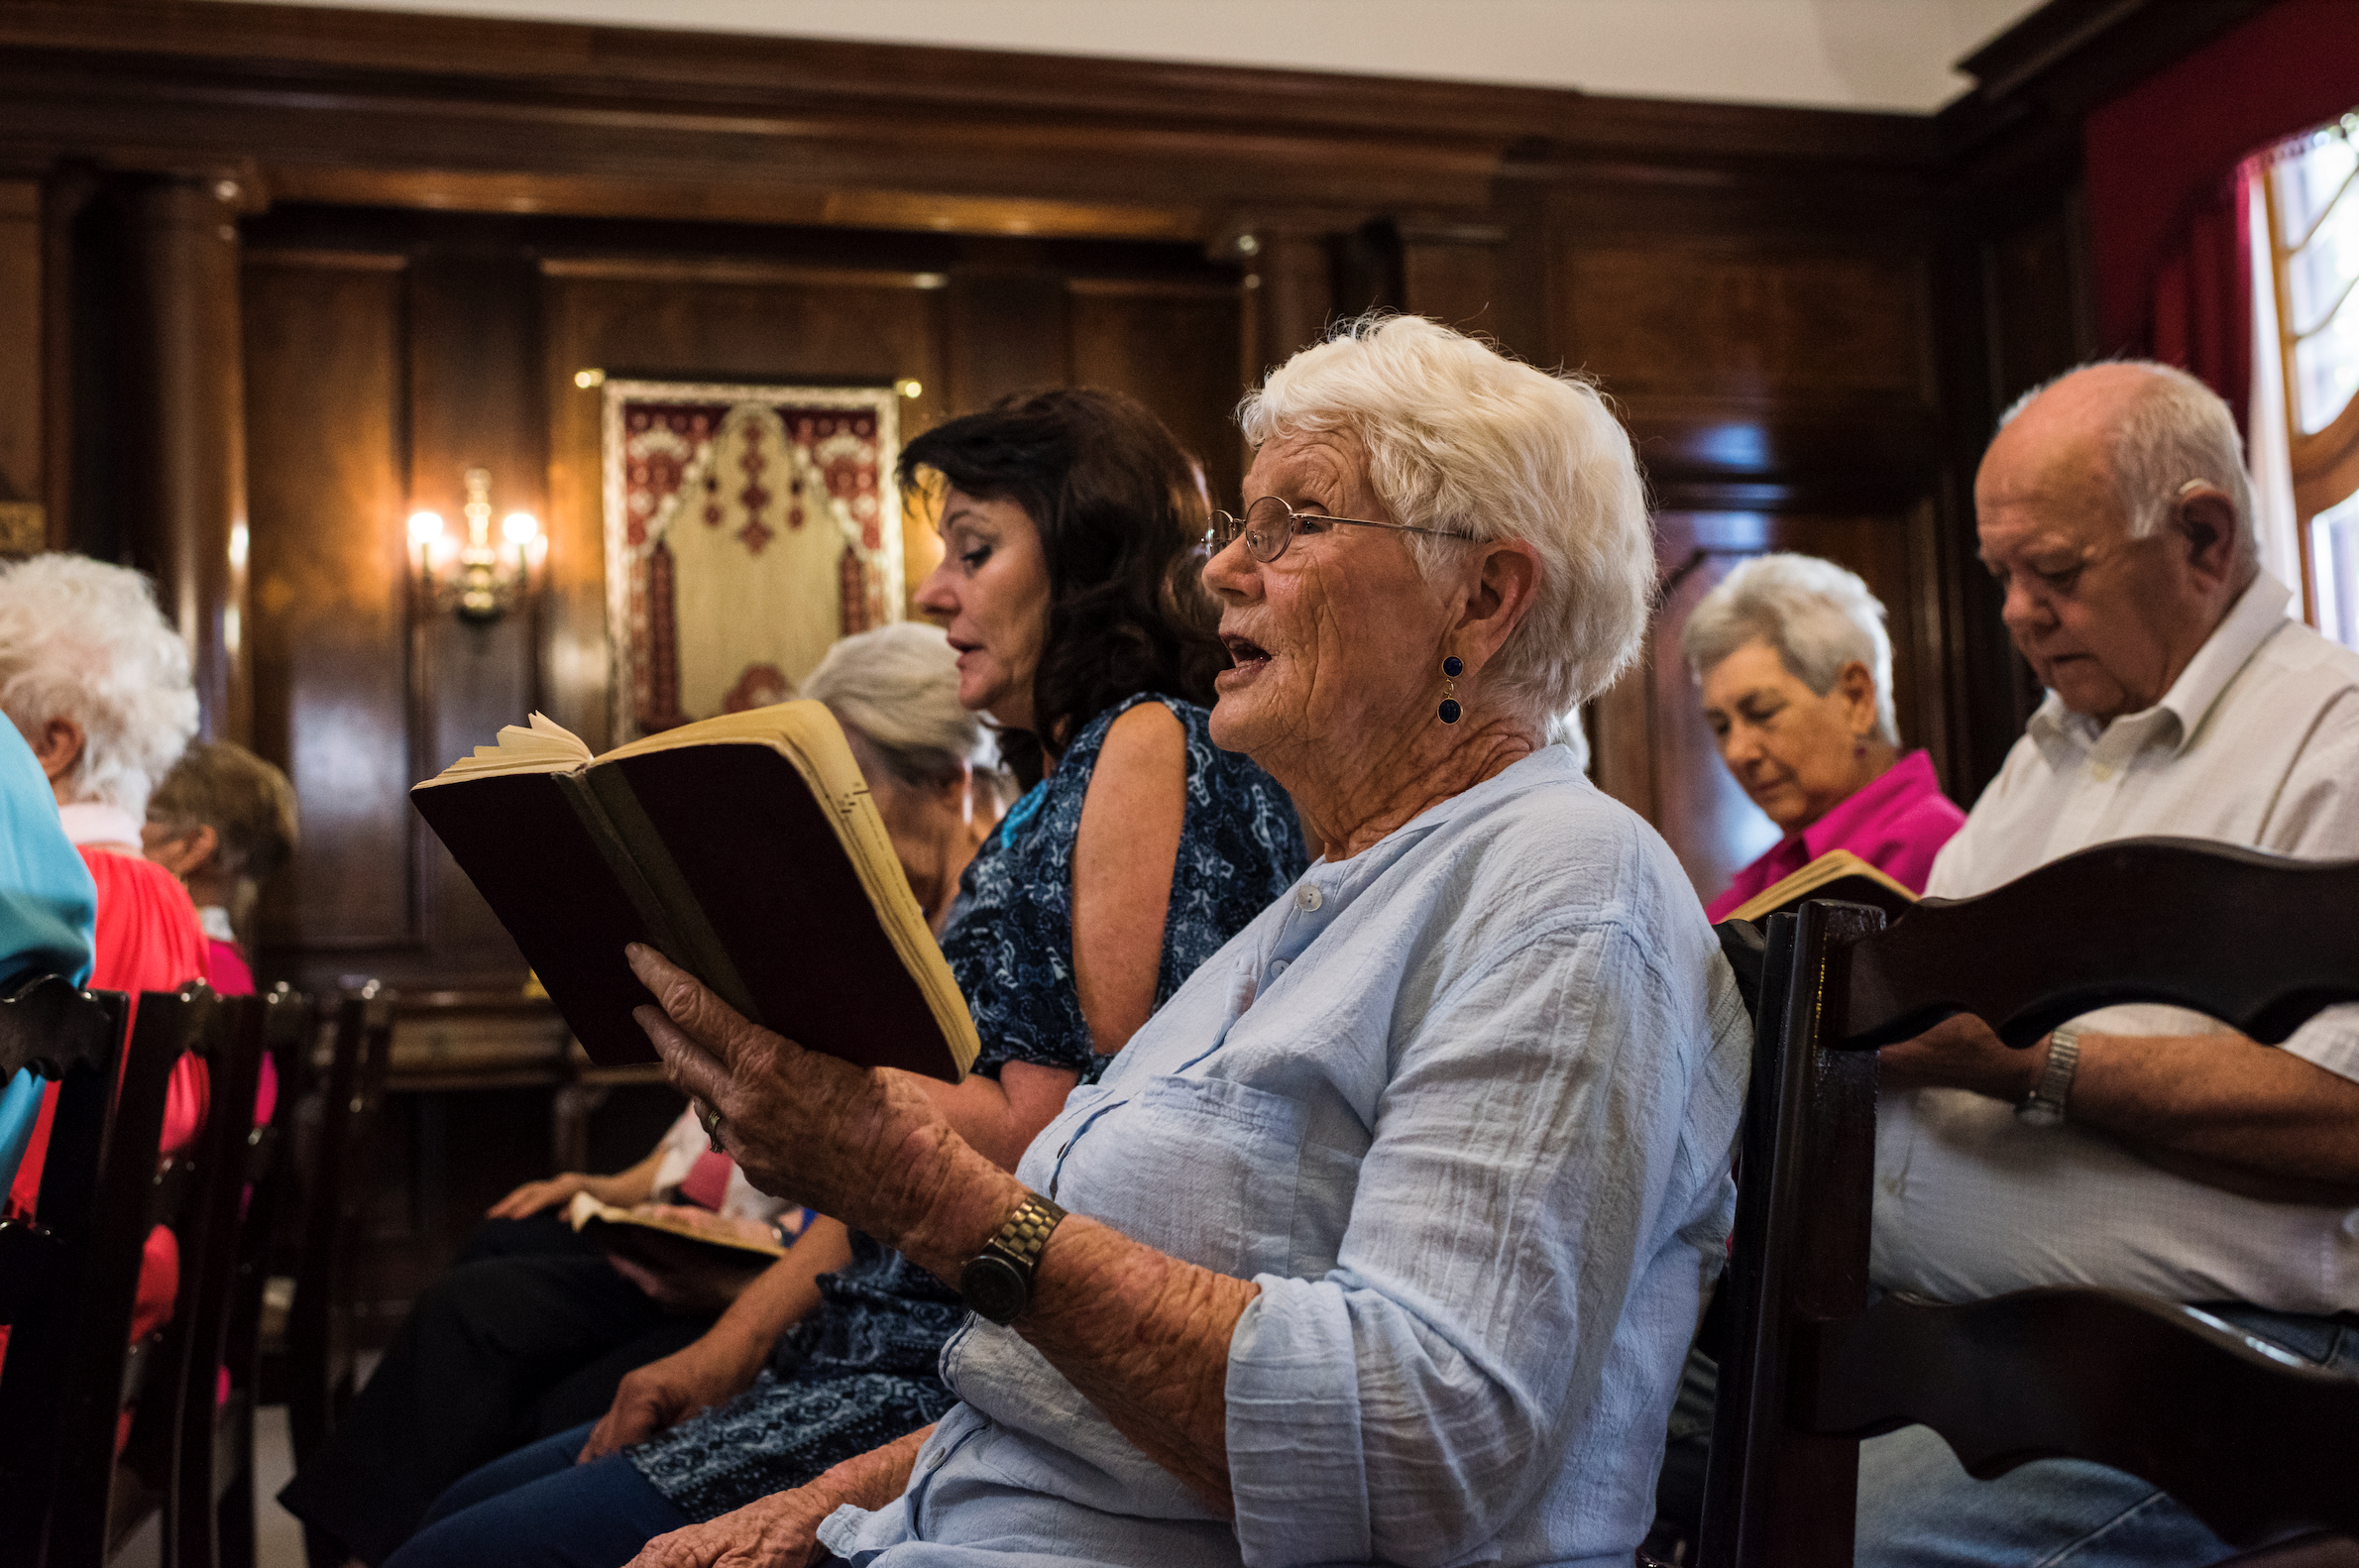 Grey haired woman singling hymn in pew sitting down in front of wood paneled wall and other congregants.